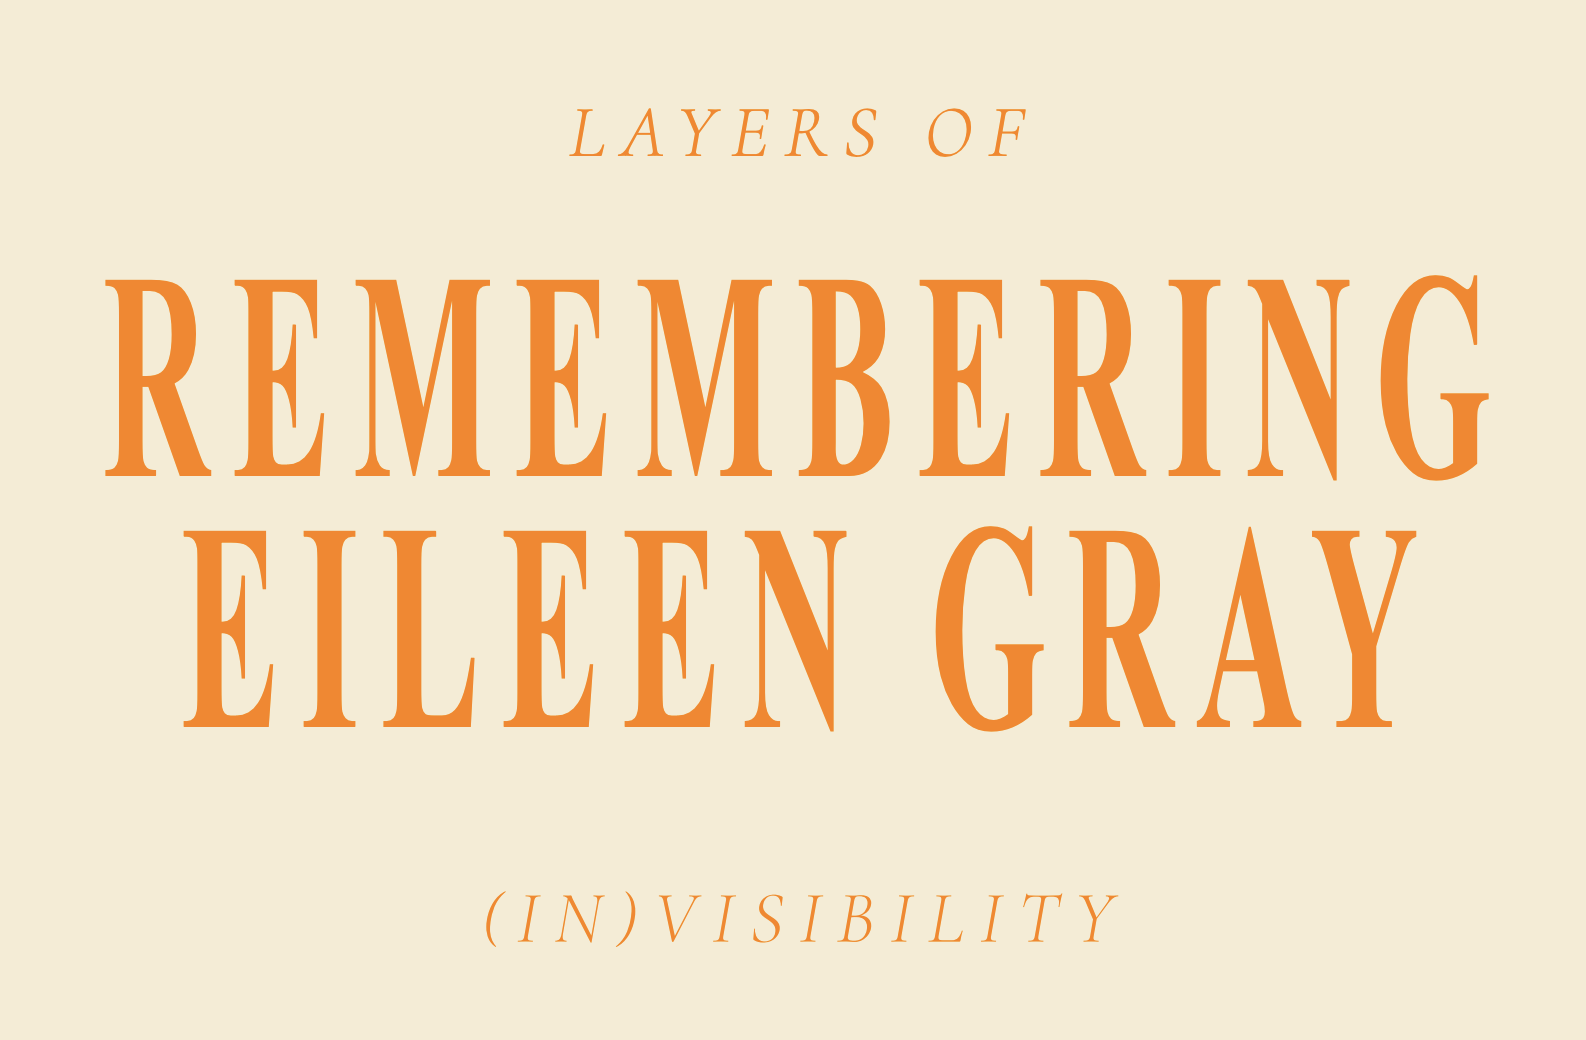 Remembering Eileen Gray, Layers of Invisibility